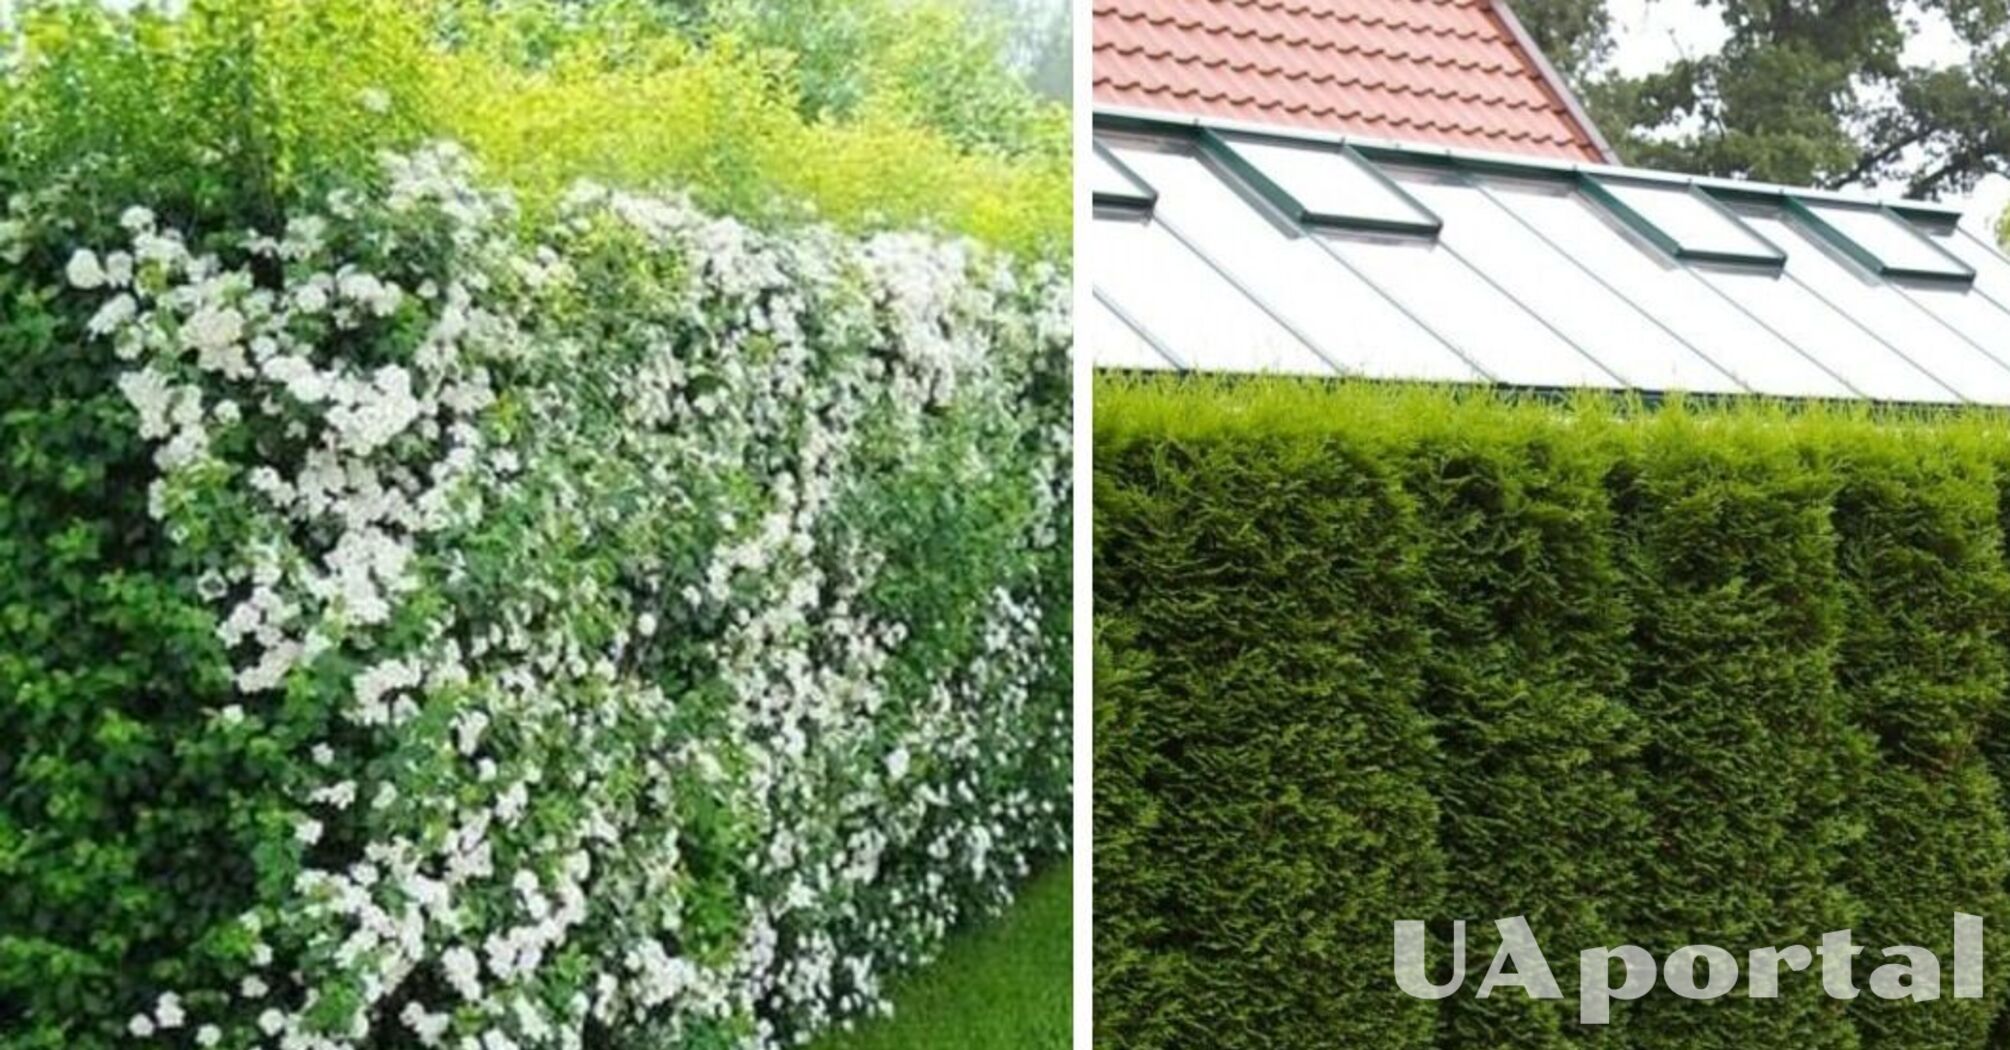 What trees and plants can be used to make a living fence